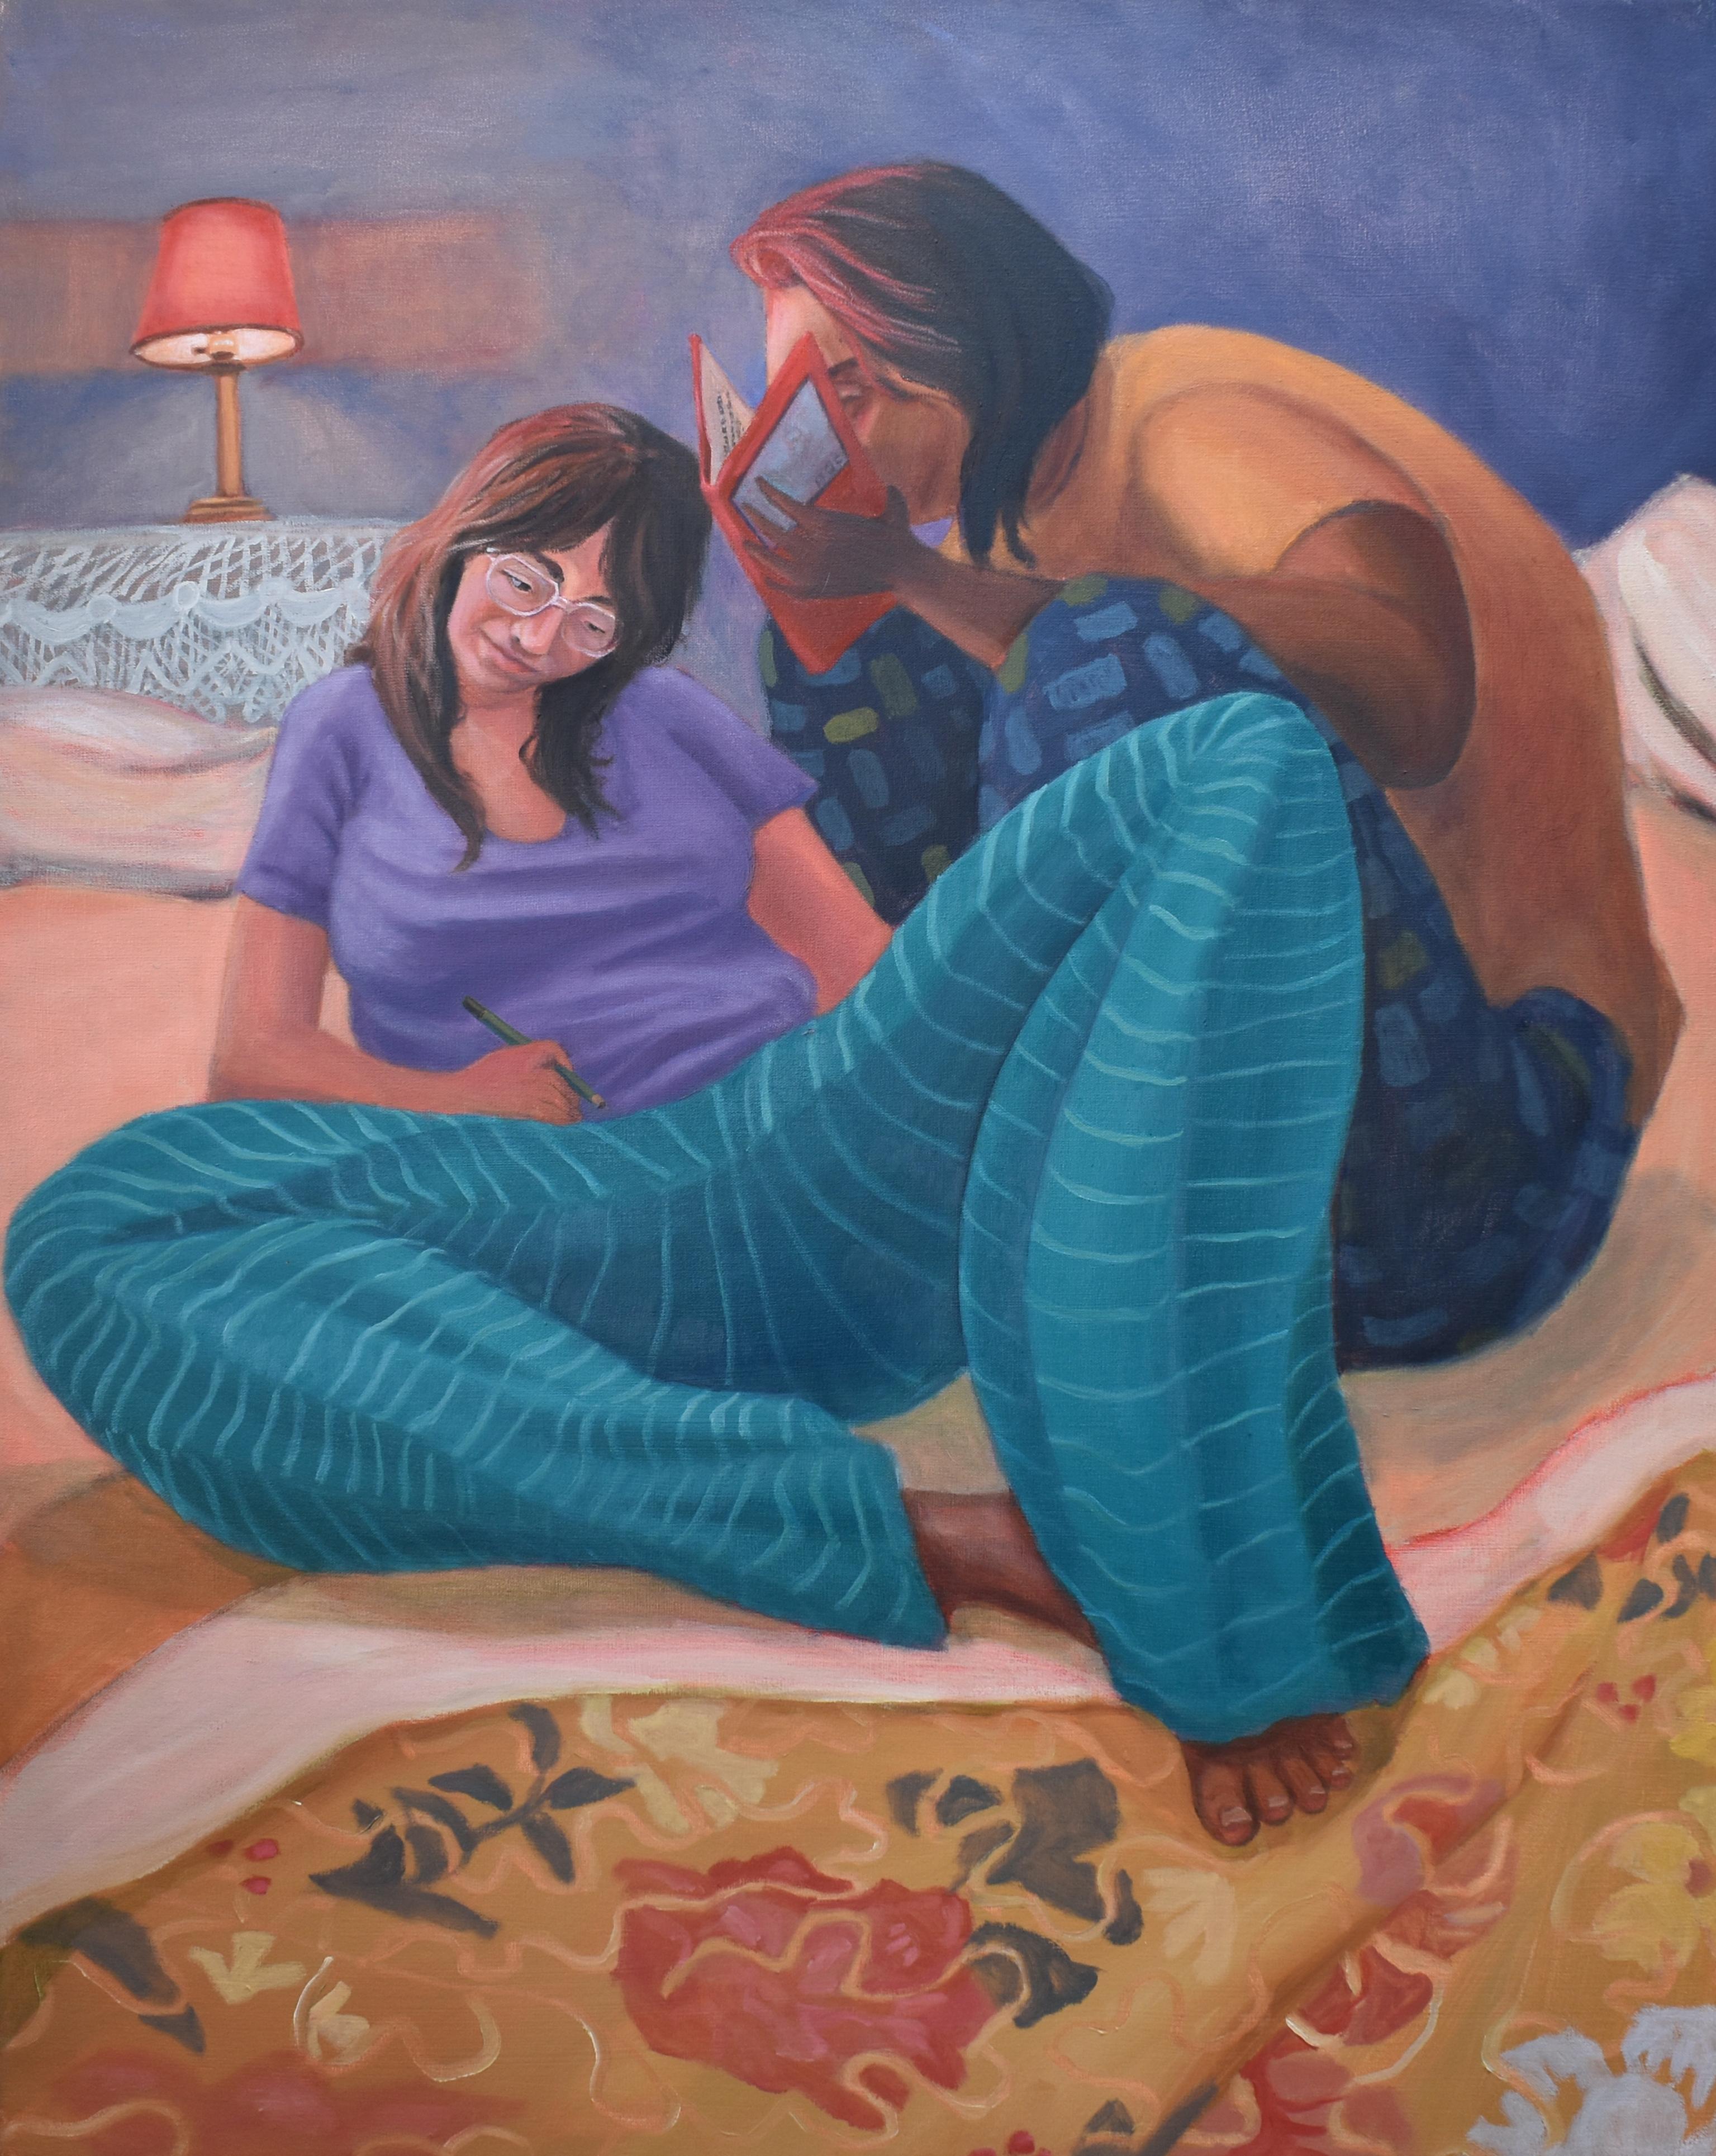 There is no Outside is a painting on canvas measuring 28 x 30 x 1.75 inches. This painting depicts two figures comfortably sharing space on a bed together, each ingrained in their own activity.  It is a moment of respite from the chaos of the